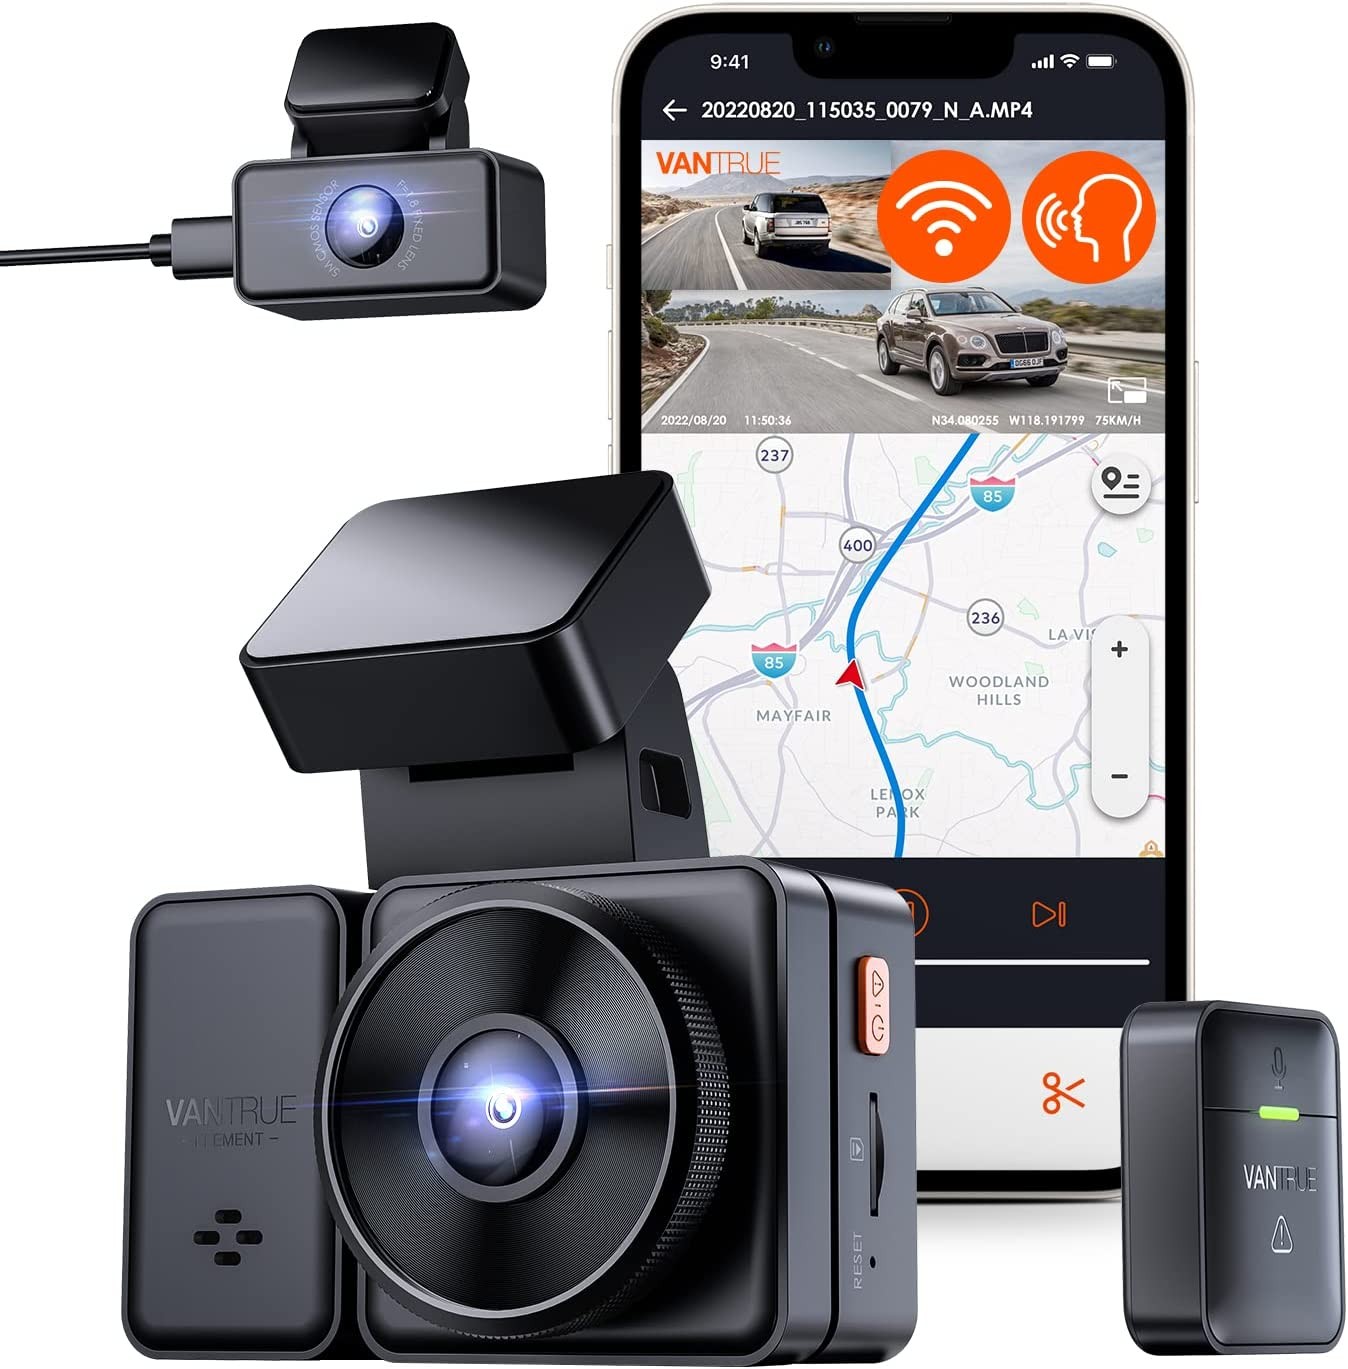 Vantrue E3 2.5K 3 Channel Front and Rear Inside Dash Cam, 3 Way WiFi GPS Dash Camera for Car, 1944P+1080P+1080P, Voice Control, IR Night Vision, 24hrs